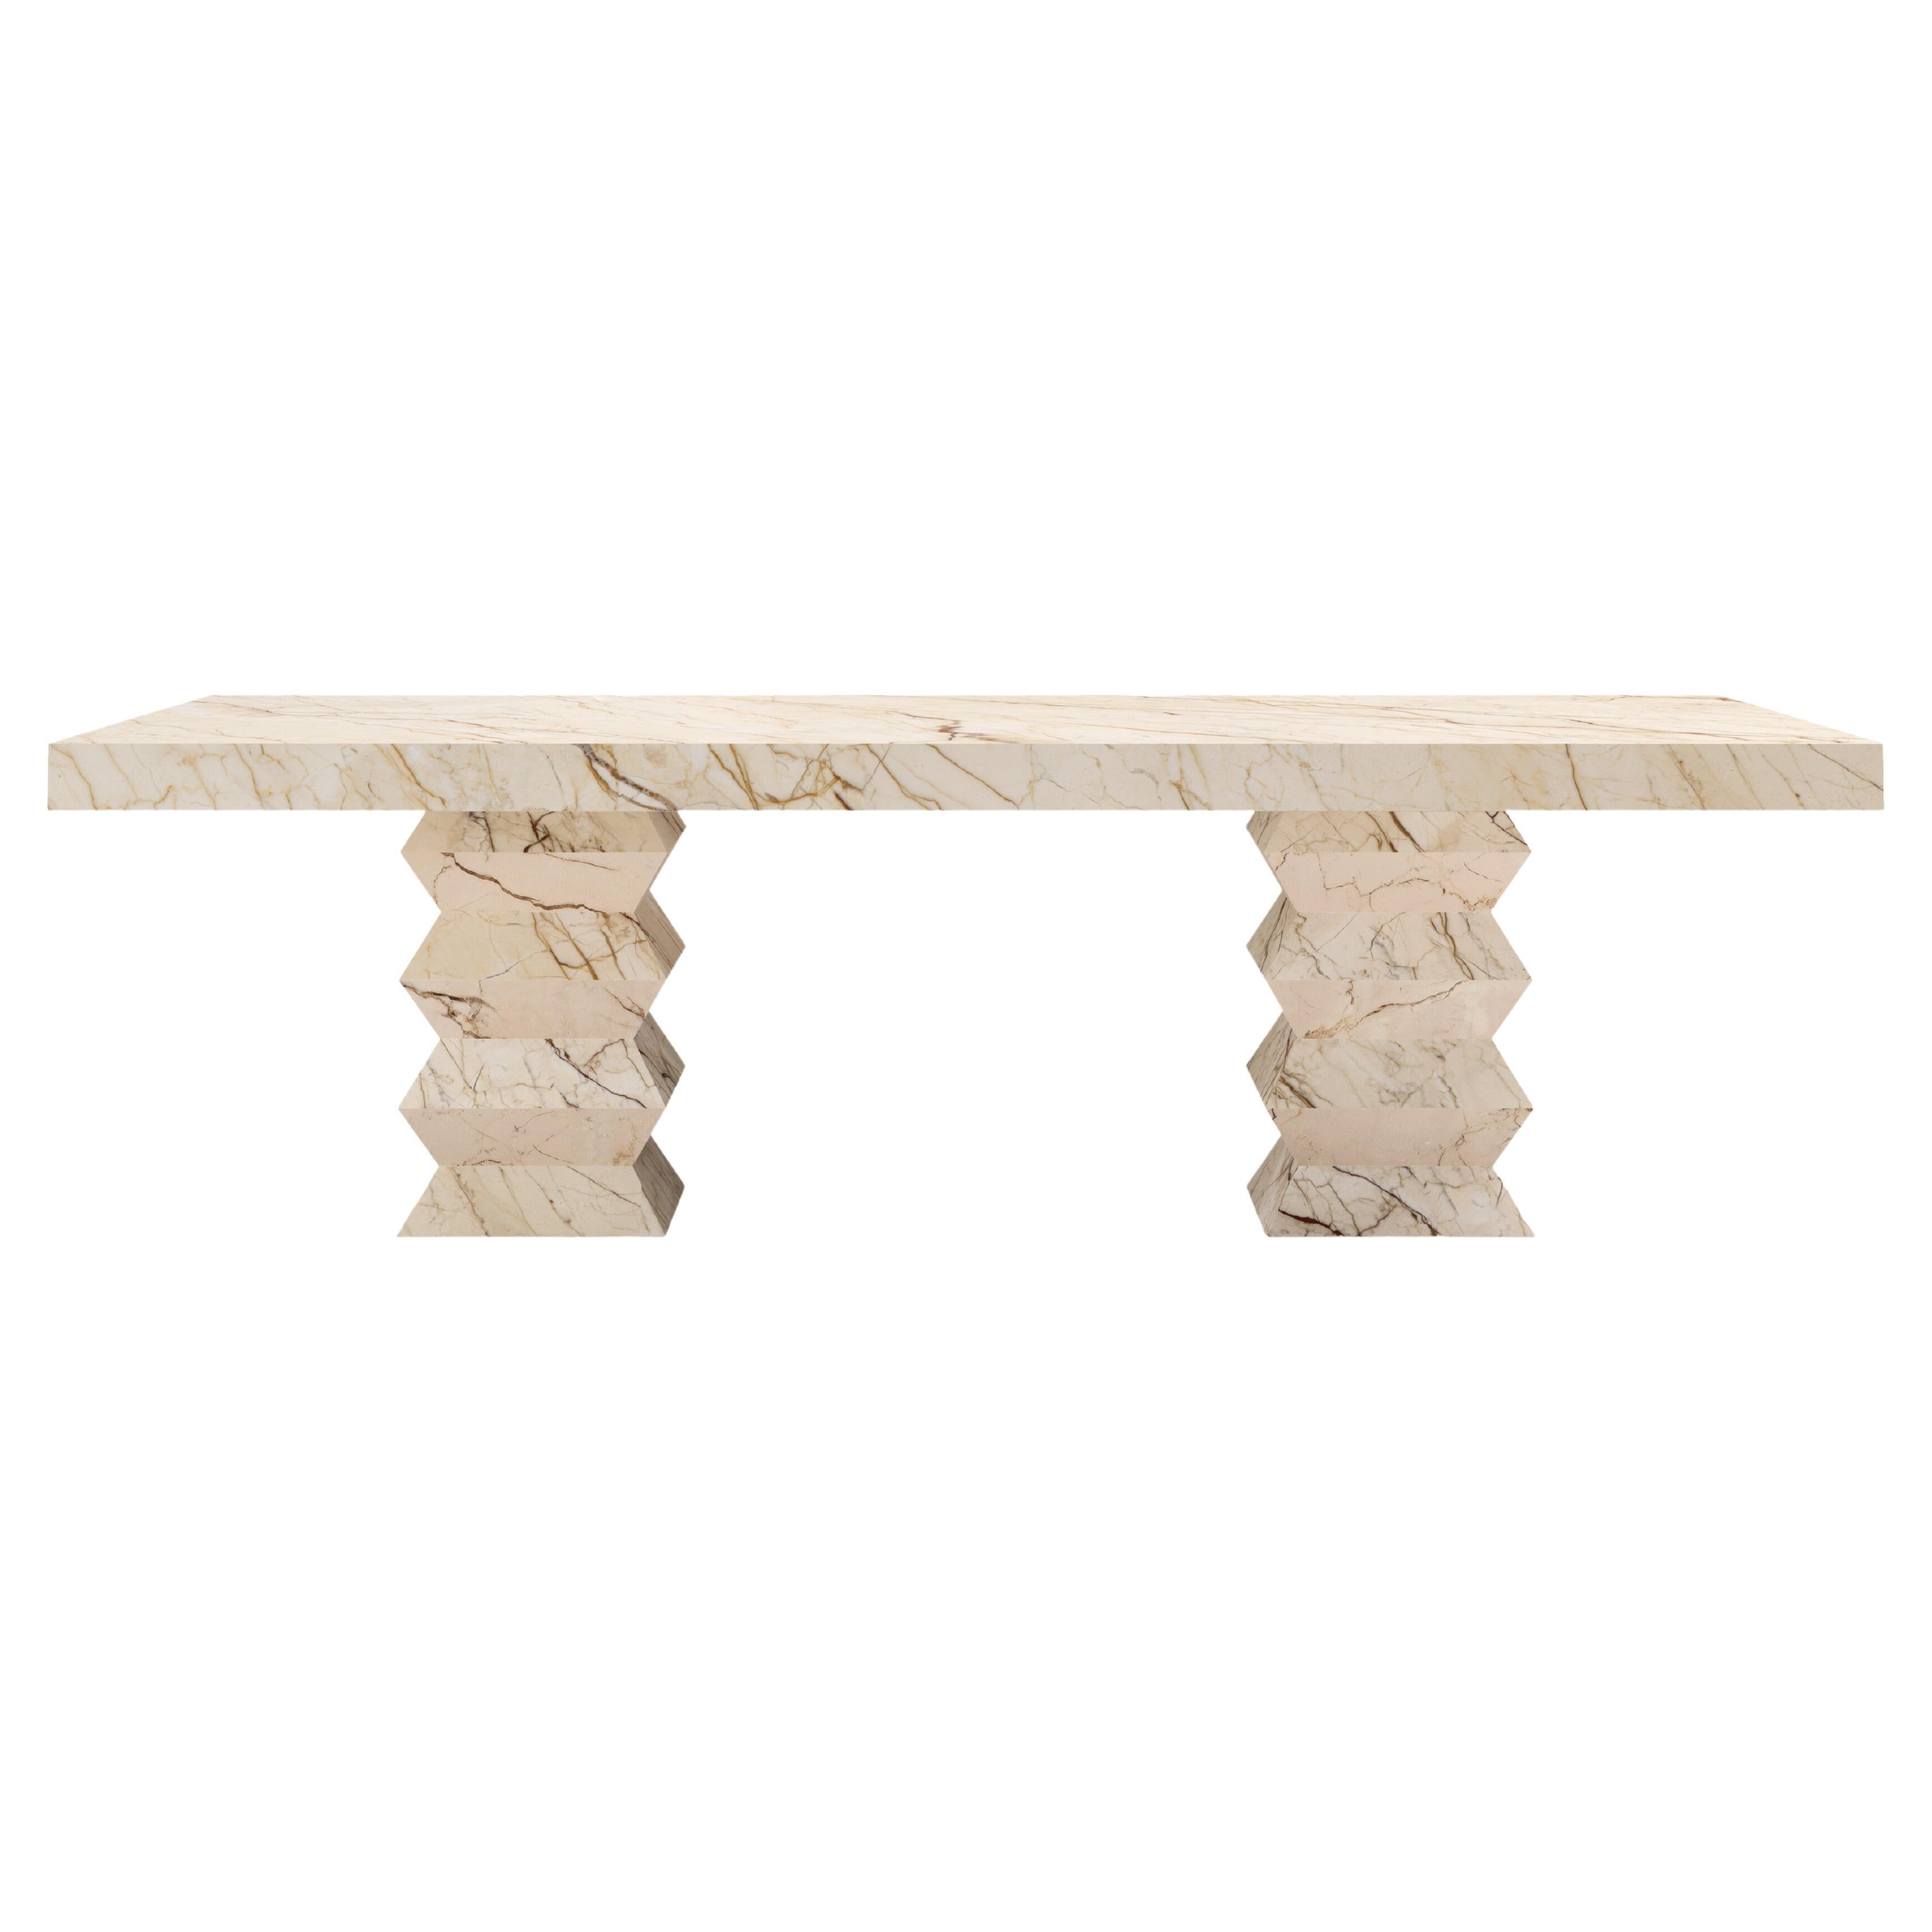 FORM(LA) Grinza Rectangle Dining Table 108"L x 48"W x 32"H Sofita Beige Marble For Sale